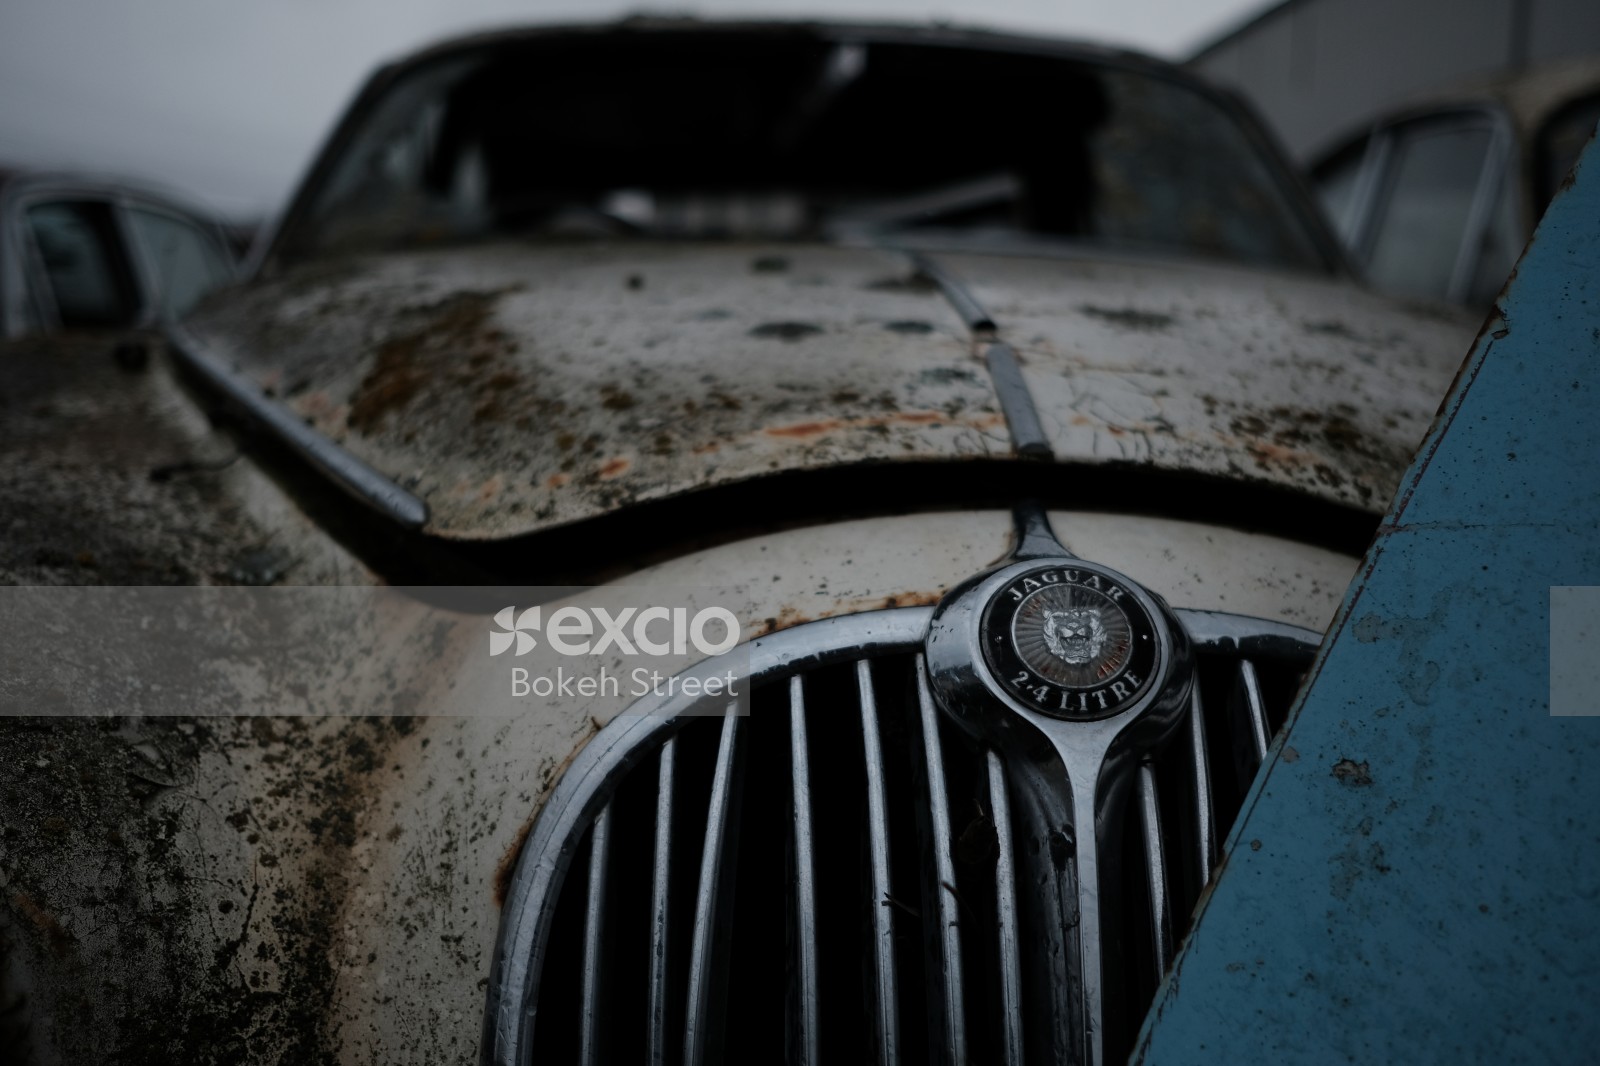 Abandoned classic white rusted mouldy Jaguar grille in Christchurch bokeh